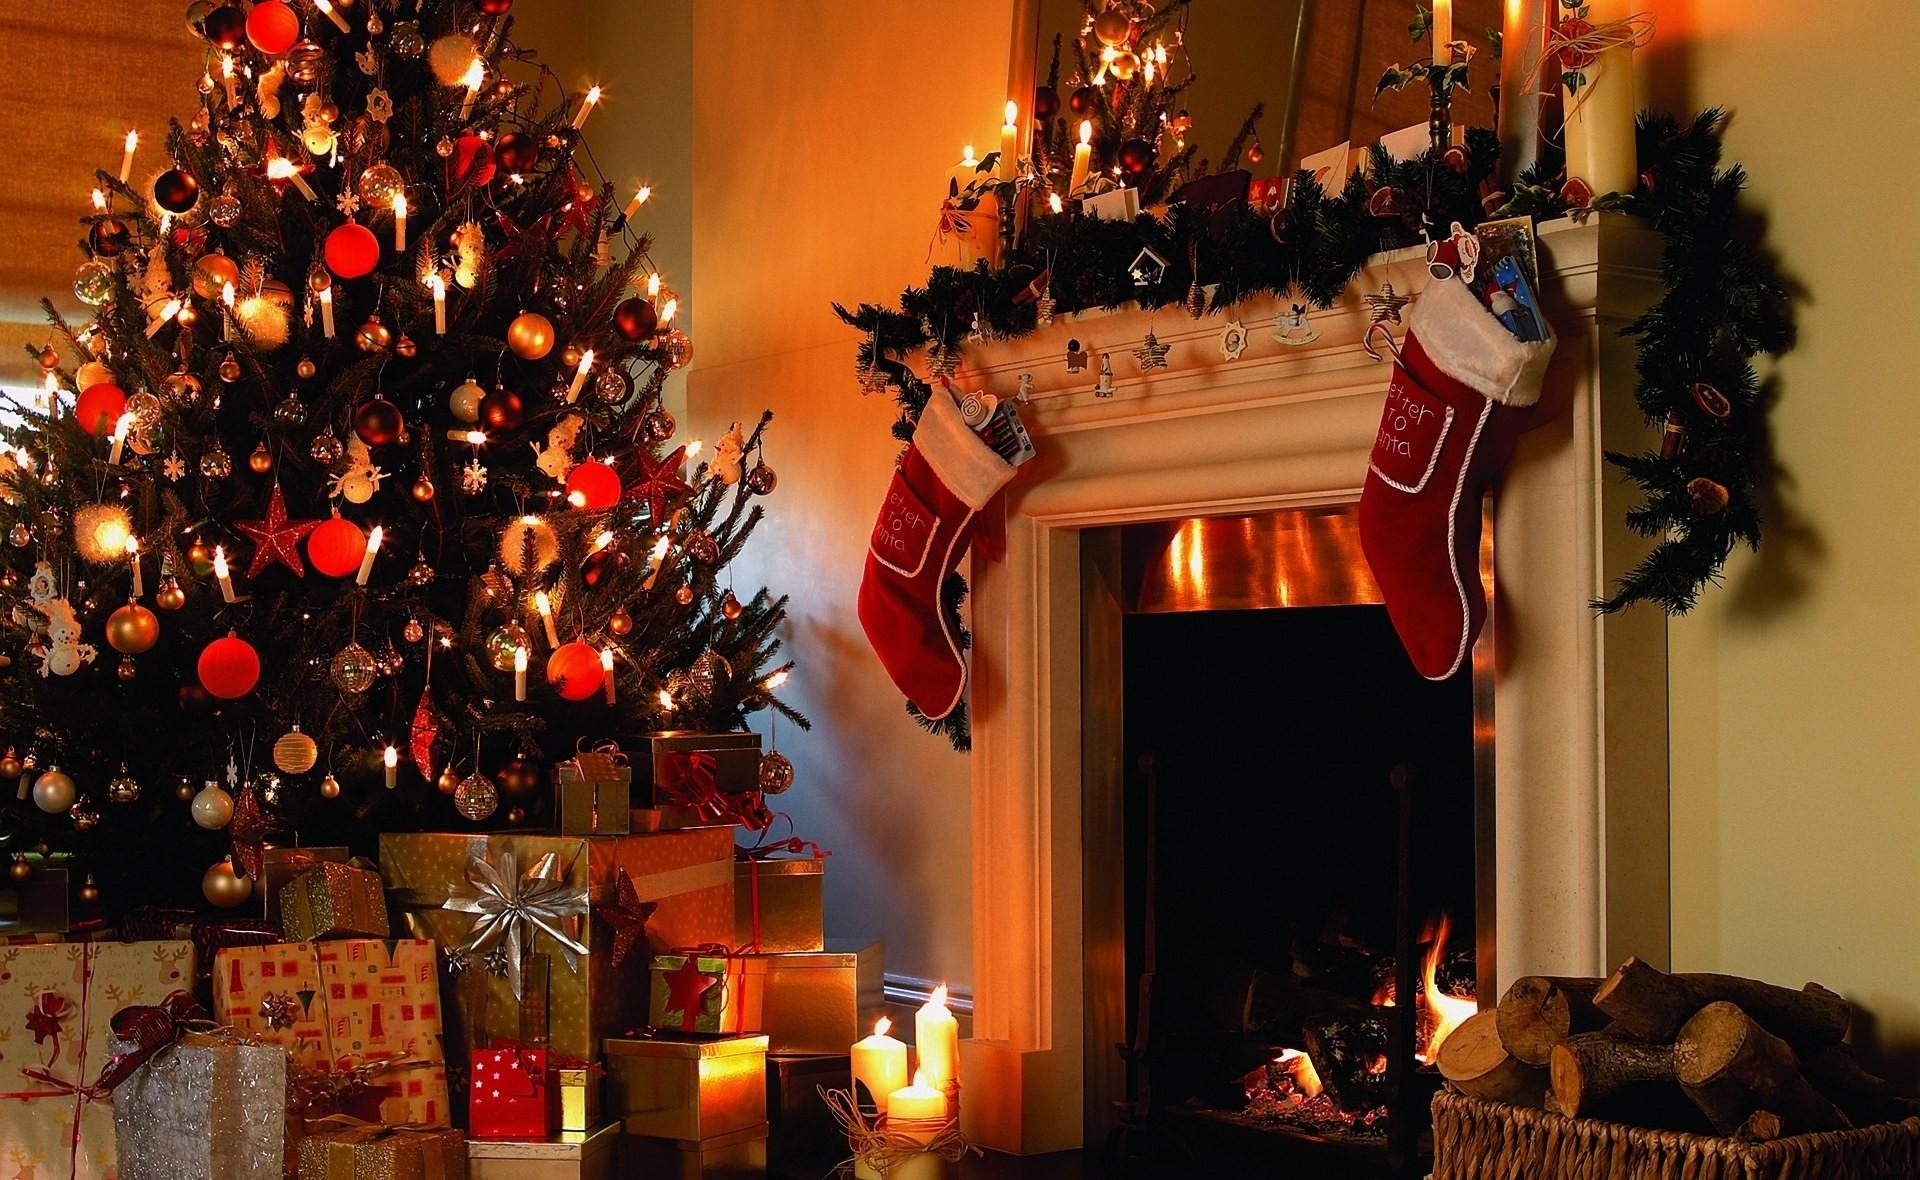 http://dnepr.info/wp-content/uploads/2016/12/christmas_tree_gifts_candles_fireplace_firewood_stockings_christmas_holiday_41413_1920x1180.jpg